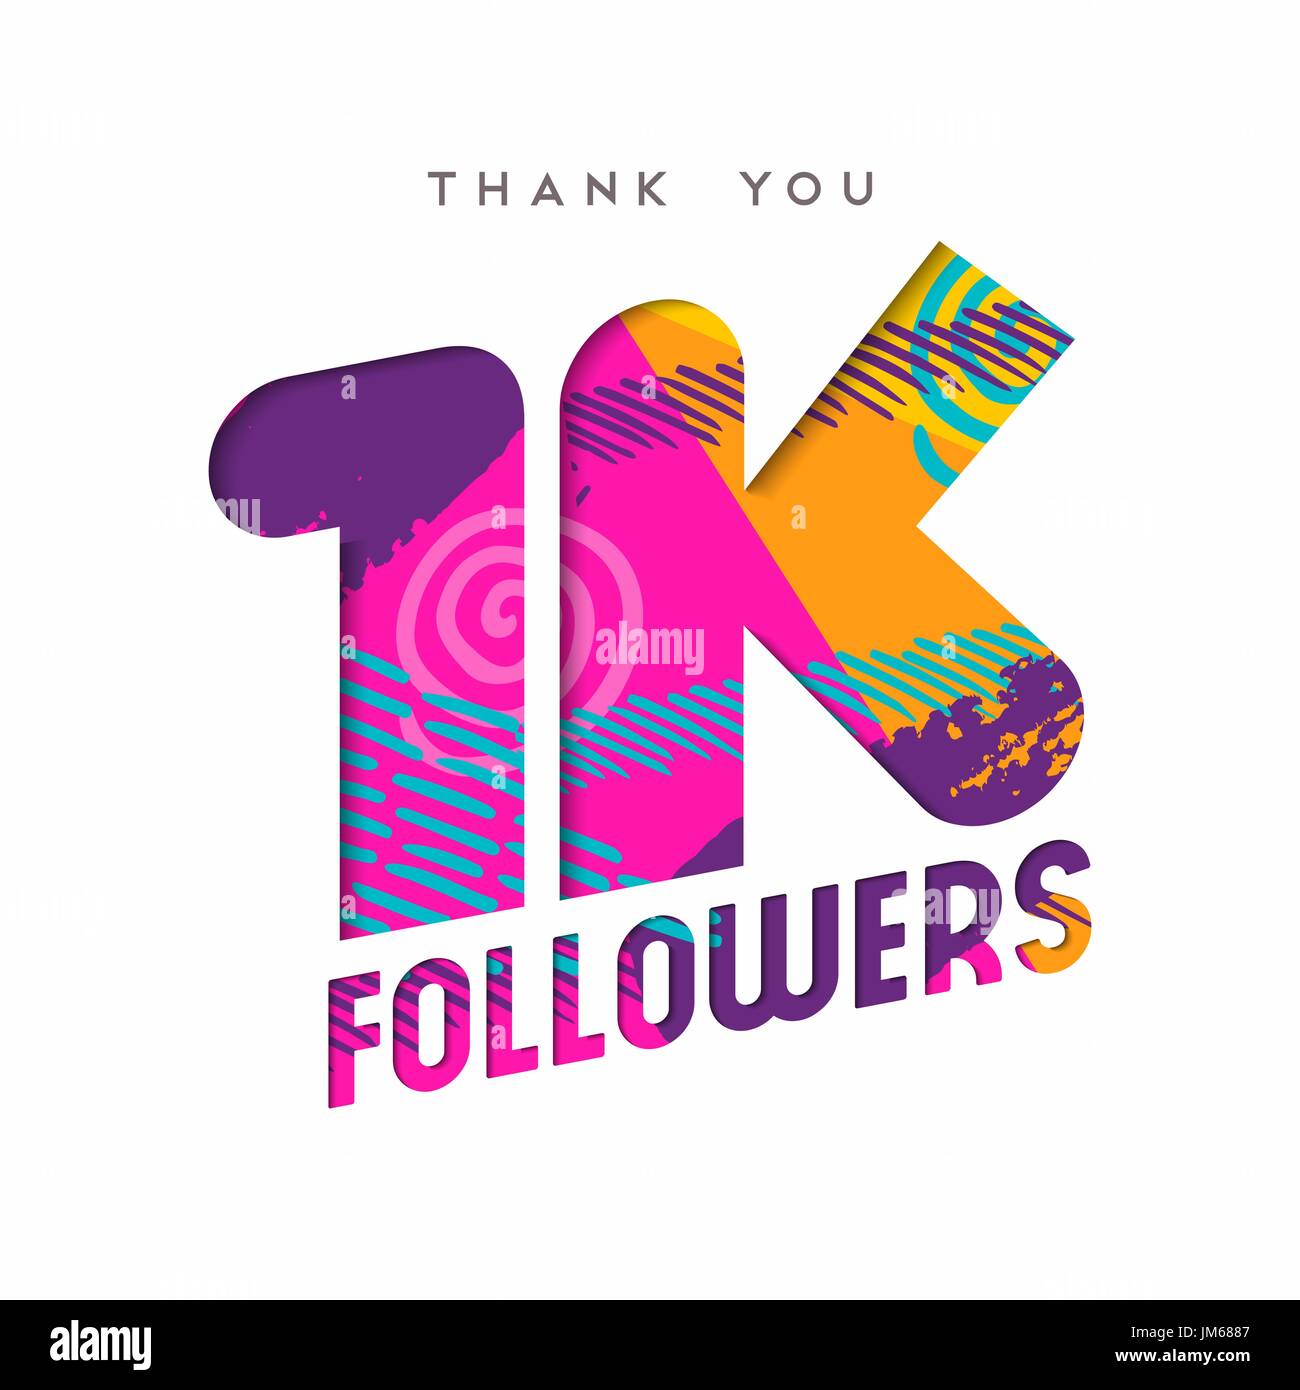 1000 followers thank you paper cut number illustration. Special 1k user goal celebration for one thousand social media friends, fans or subscribers. E Stock Vector